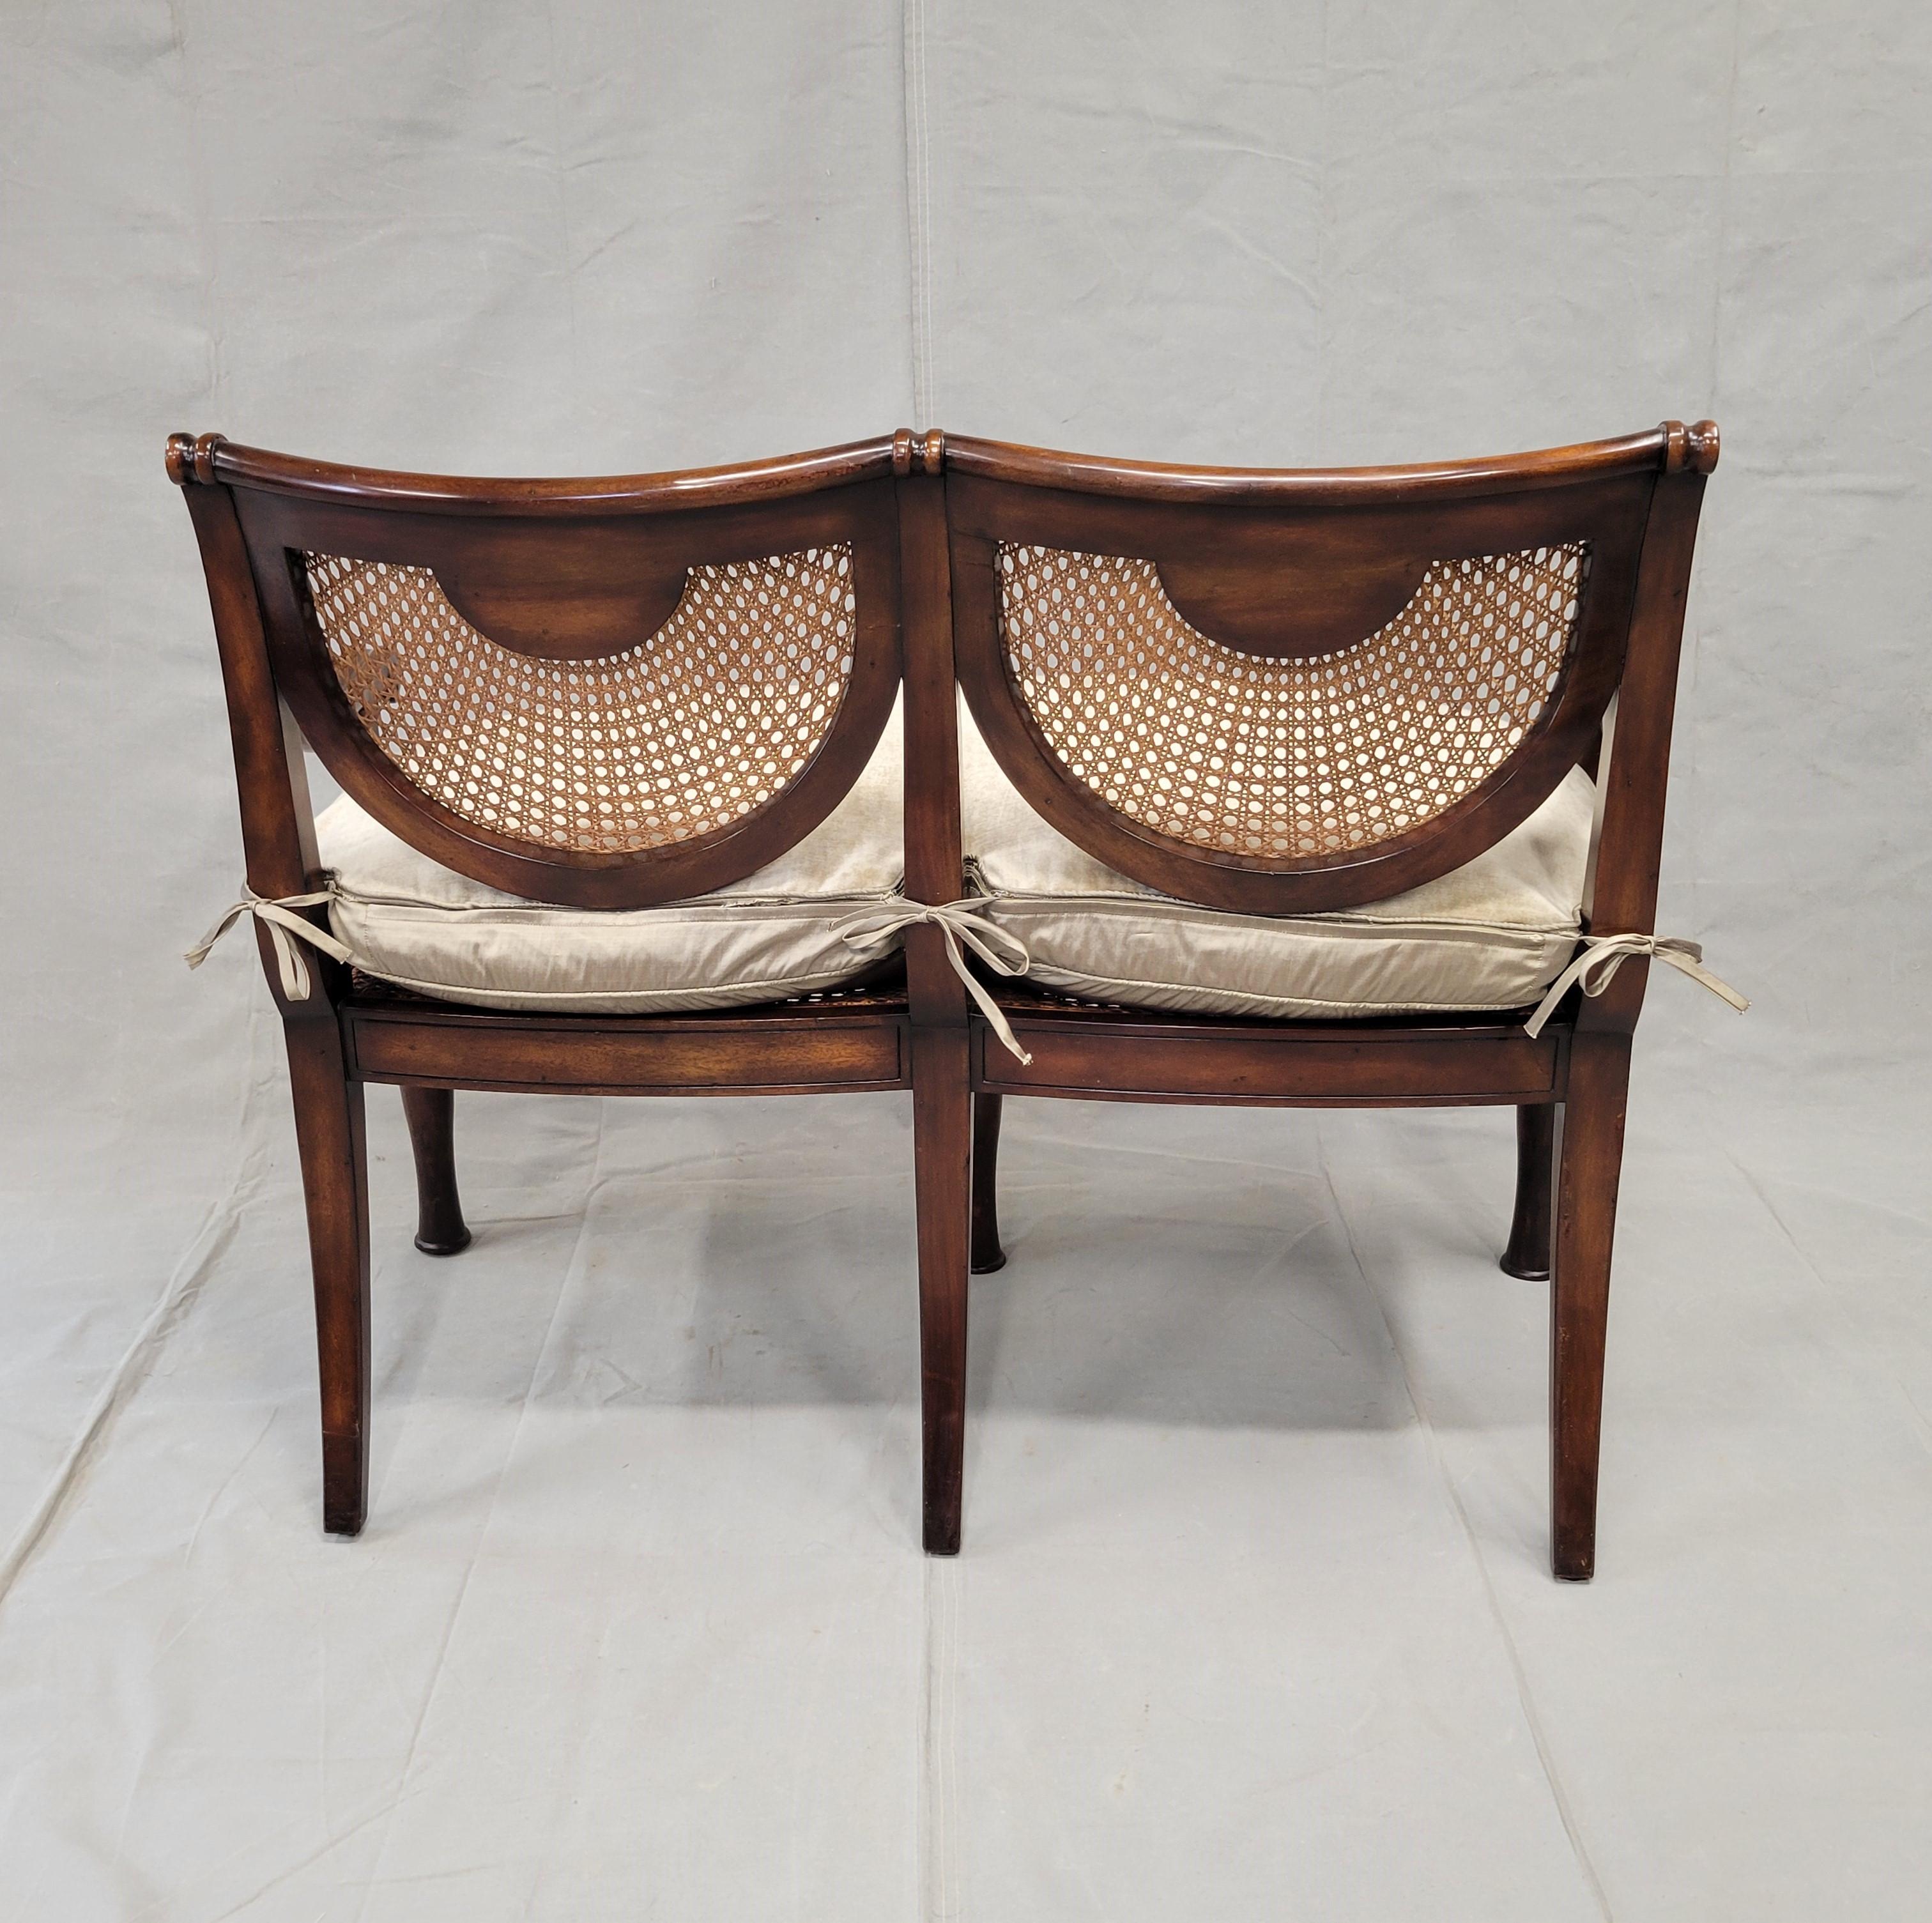 Vintage Theodore Alexander Regency Caned Mahogany Settee With Down Cushion For Sale 5